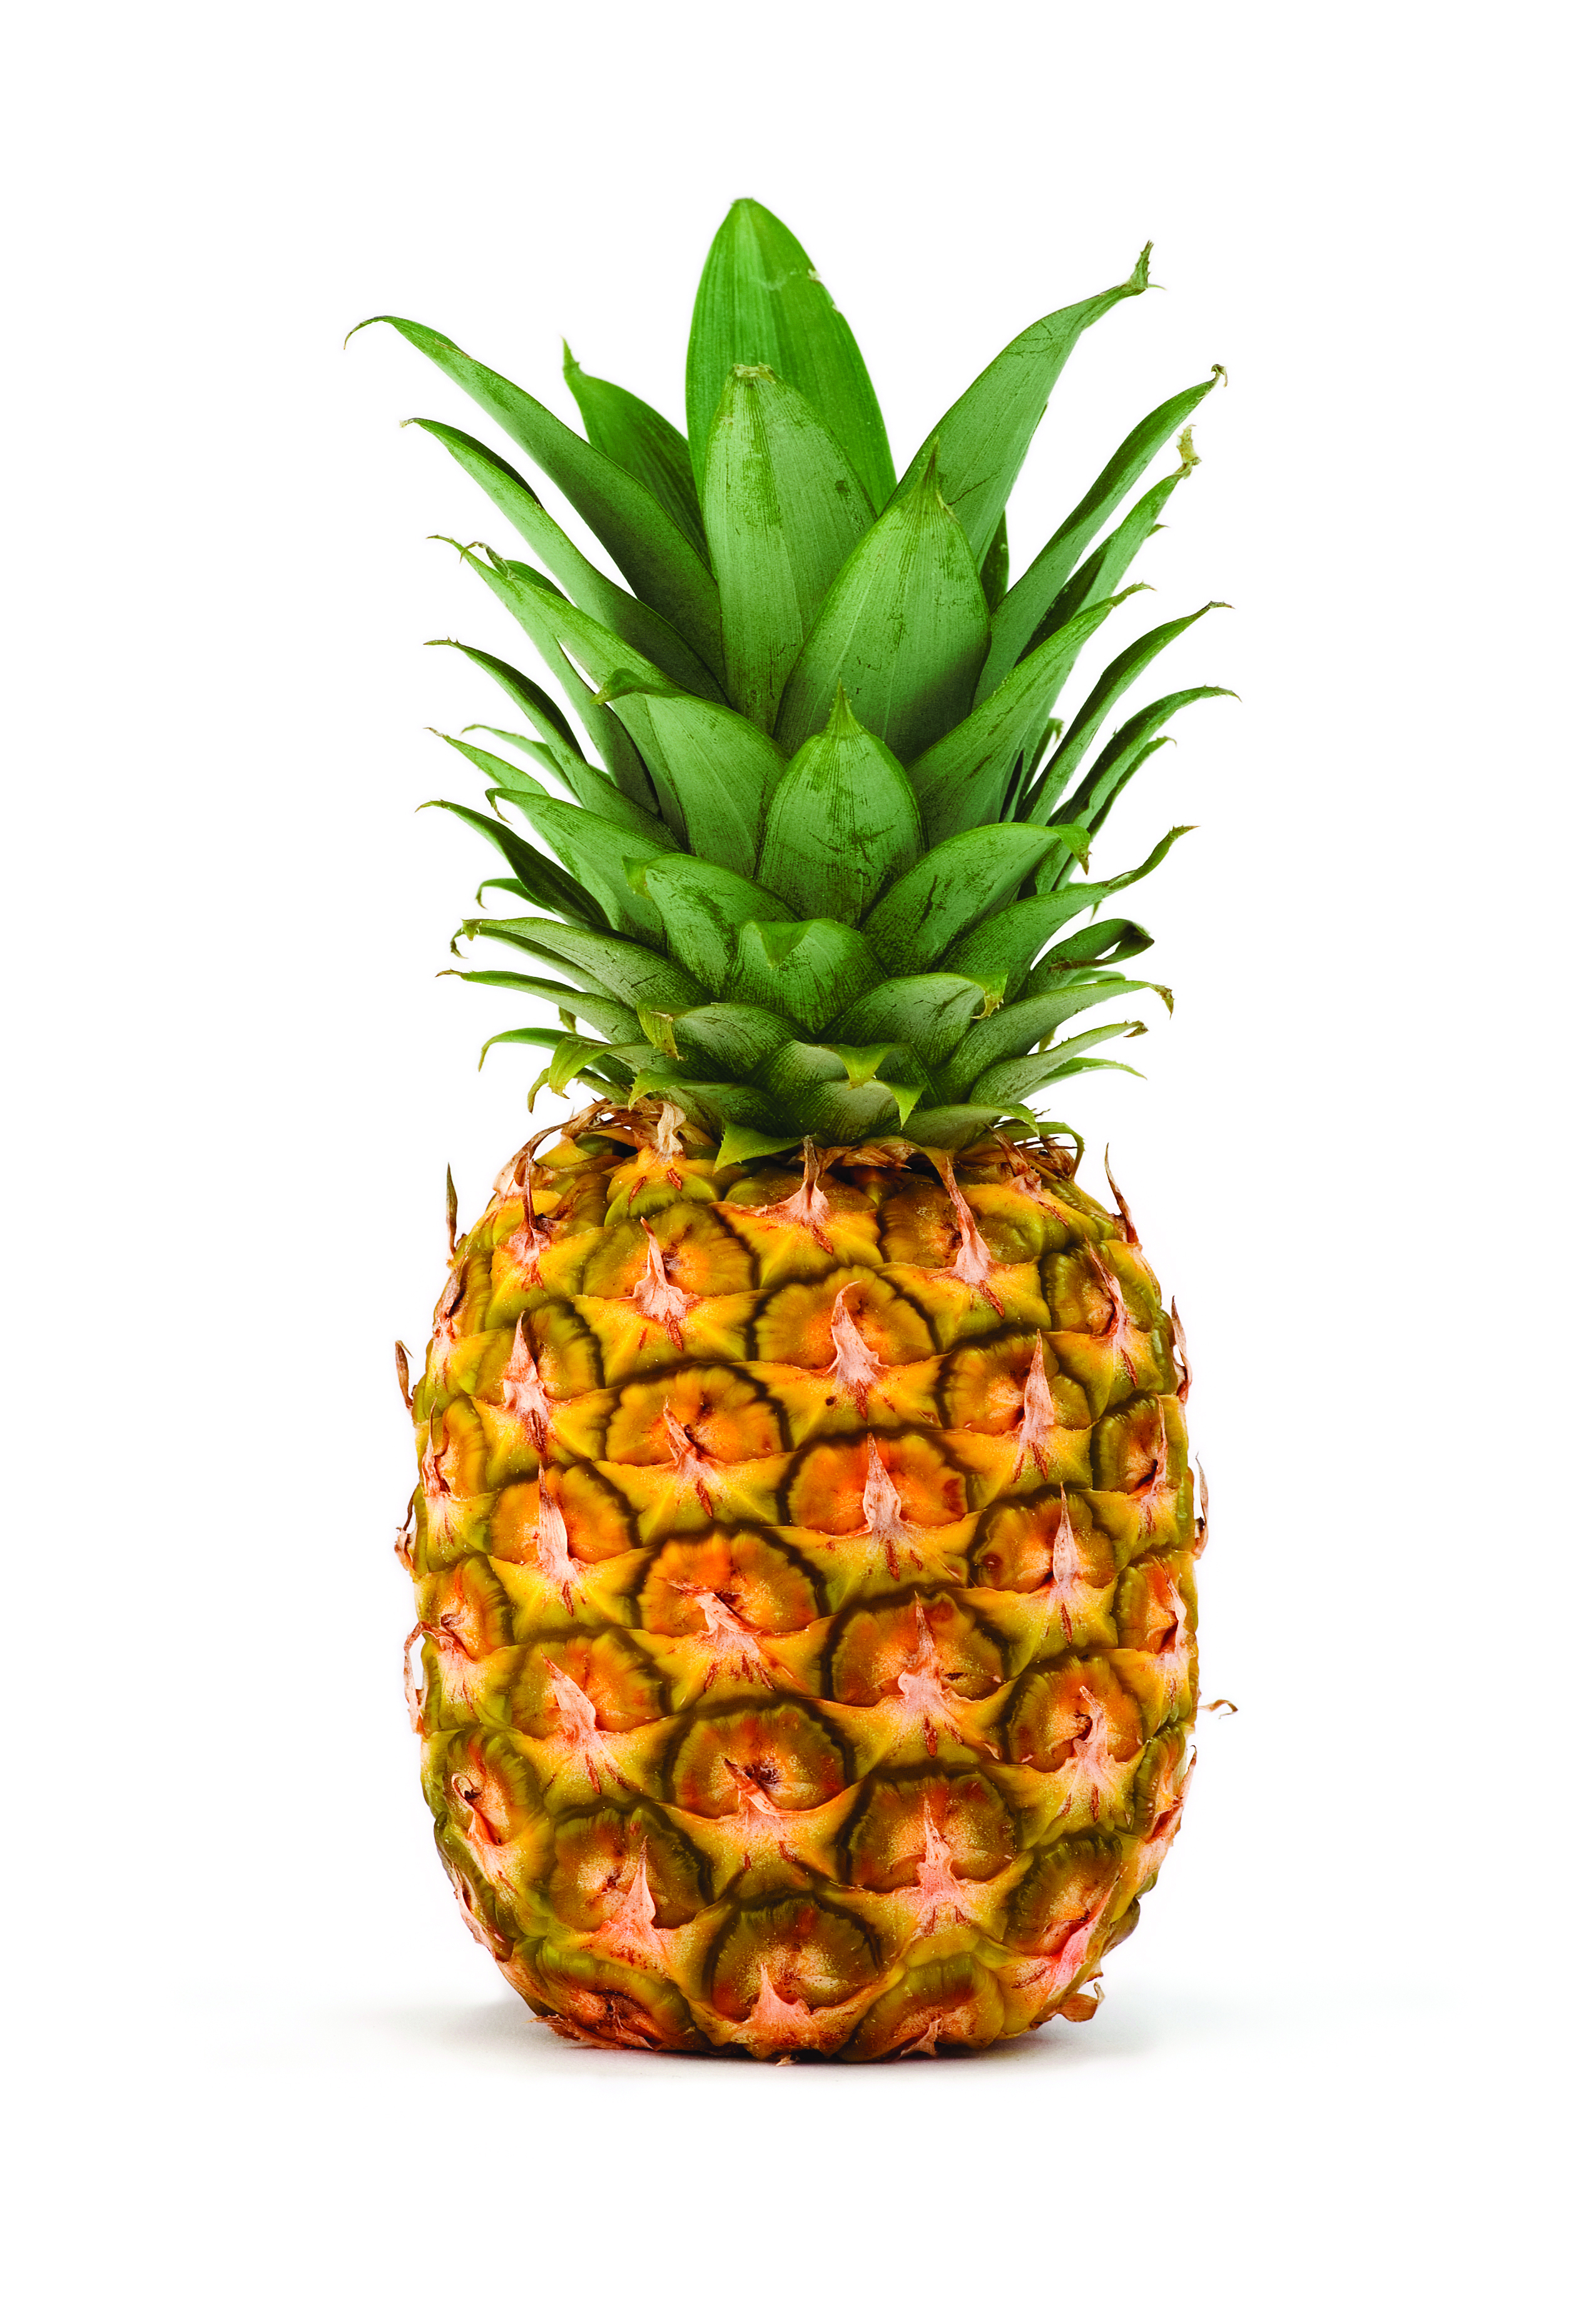 Pineapple Image - Pineapple, Transparent background PNG HD thumbnail